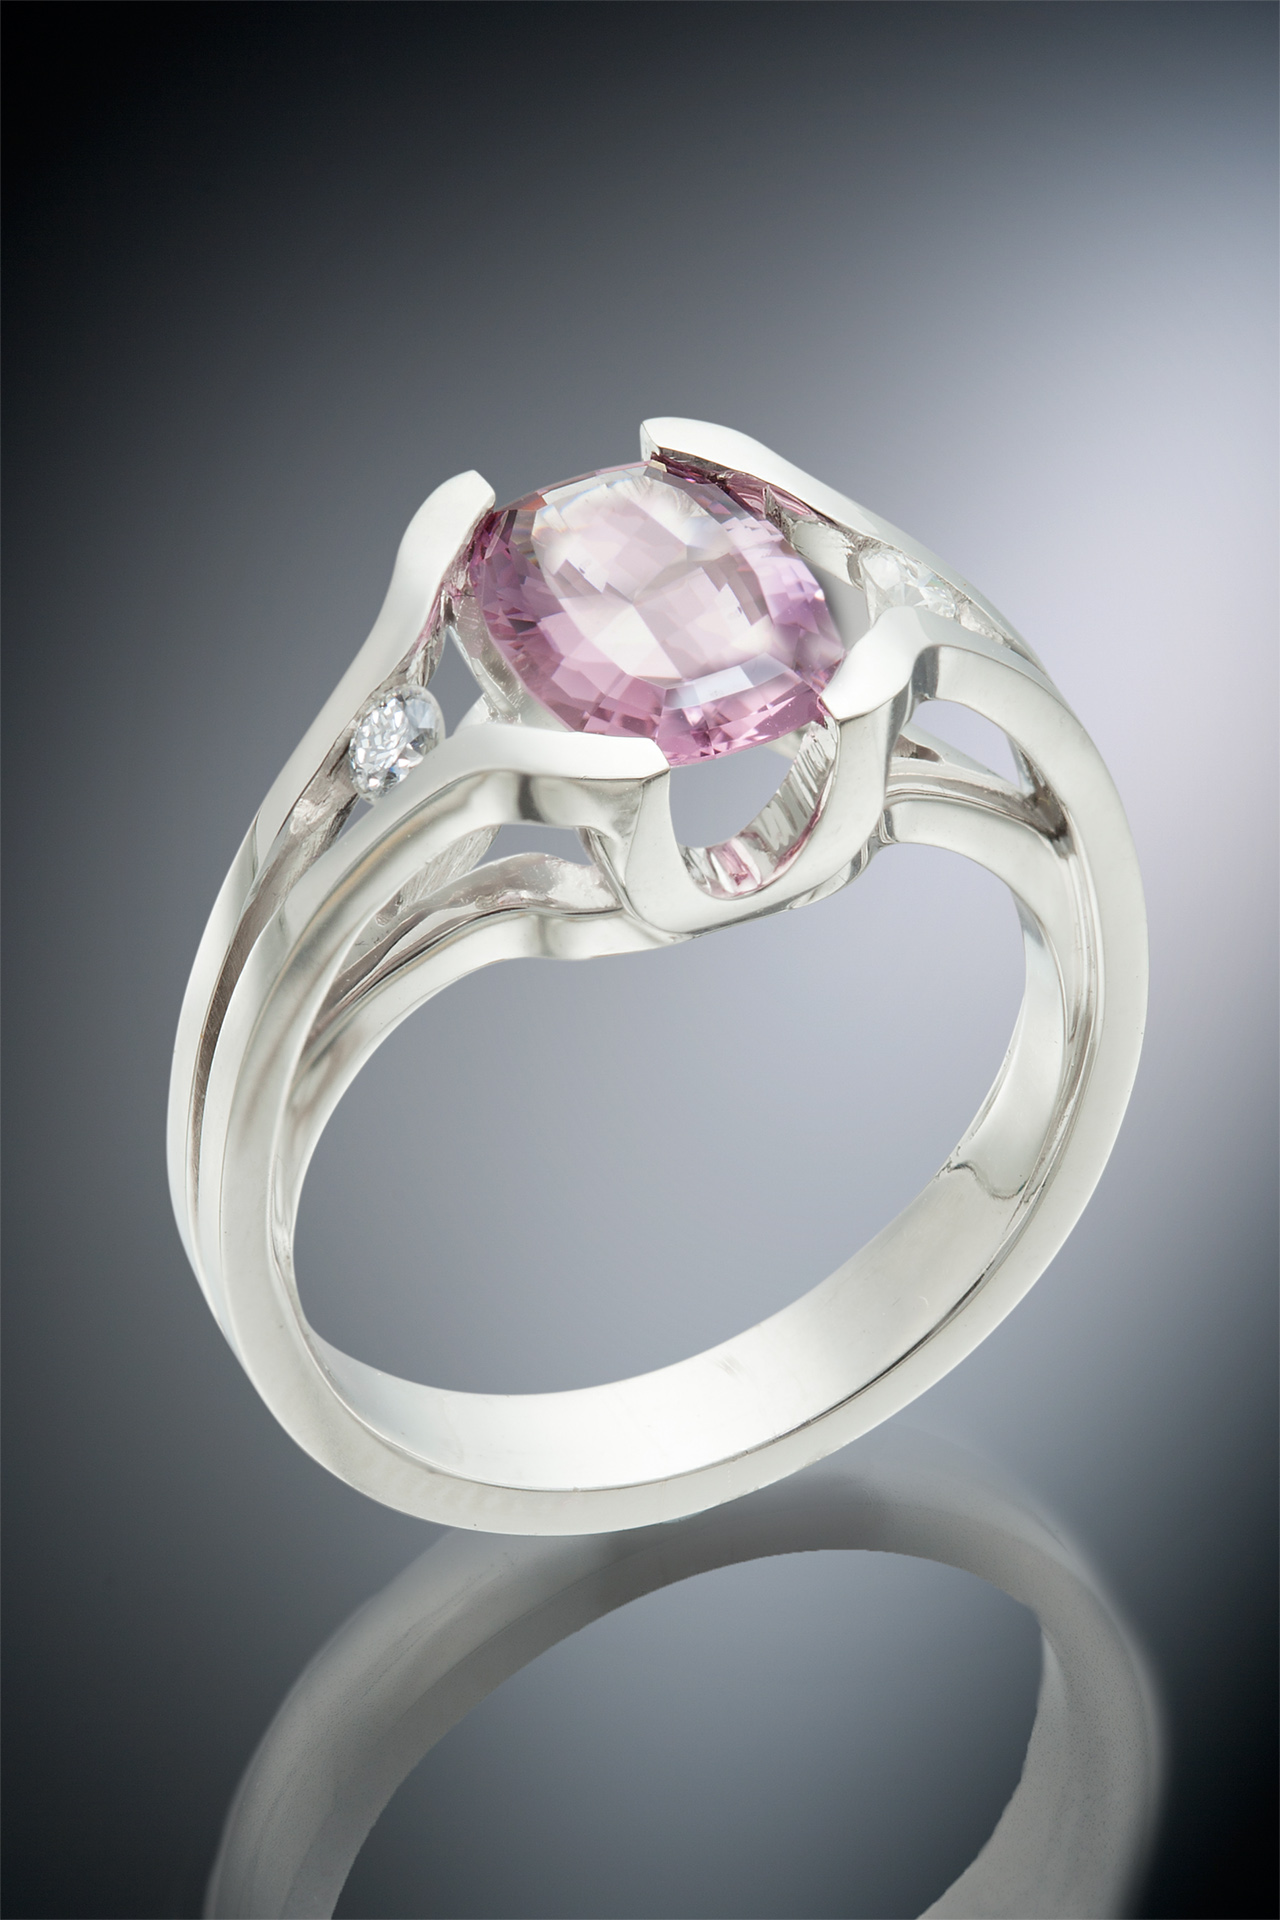 RING 858 - Spinel in 18kt White Gold - Michael Alexander Jewelry